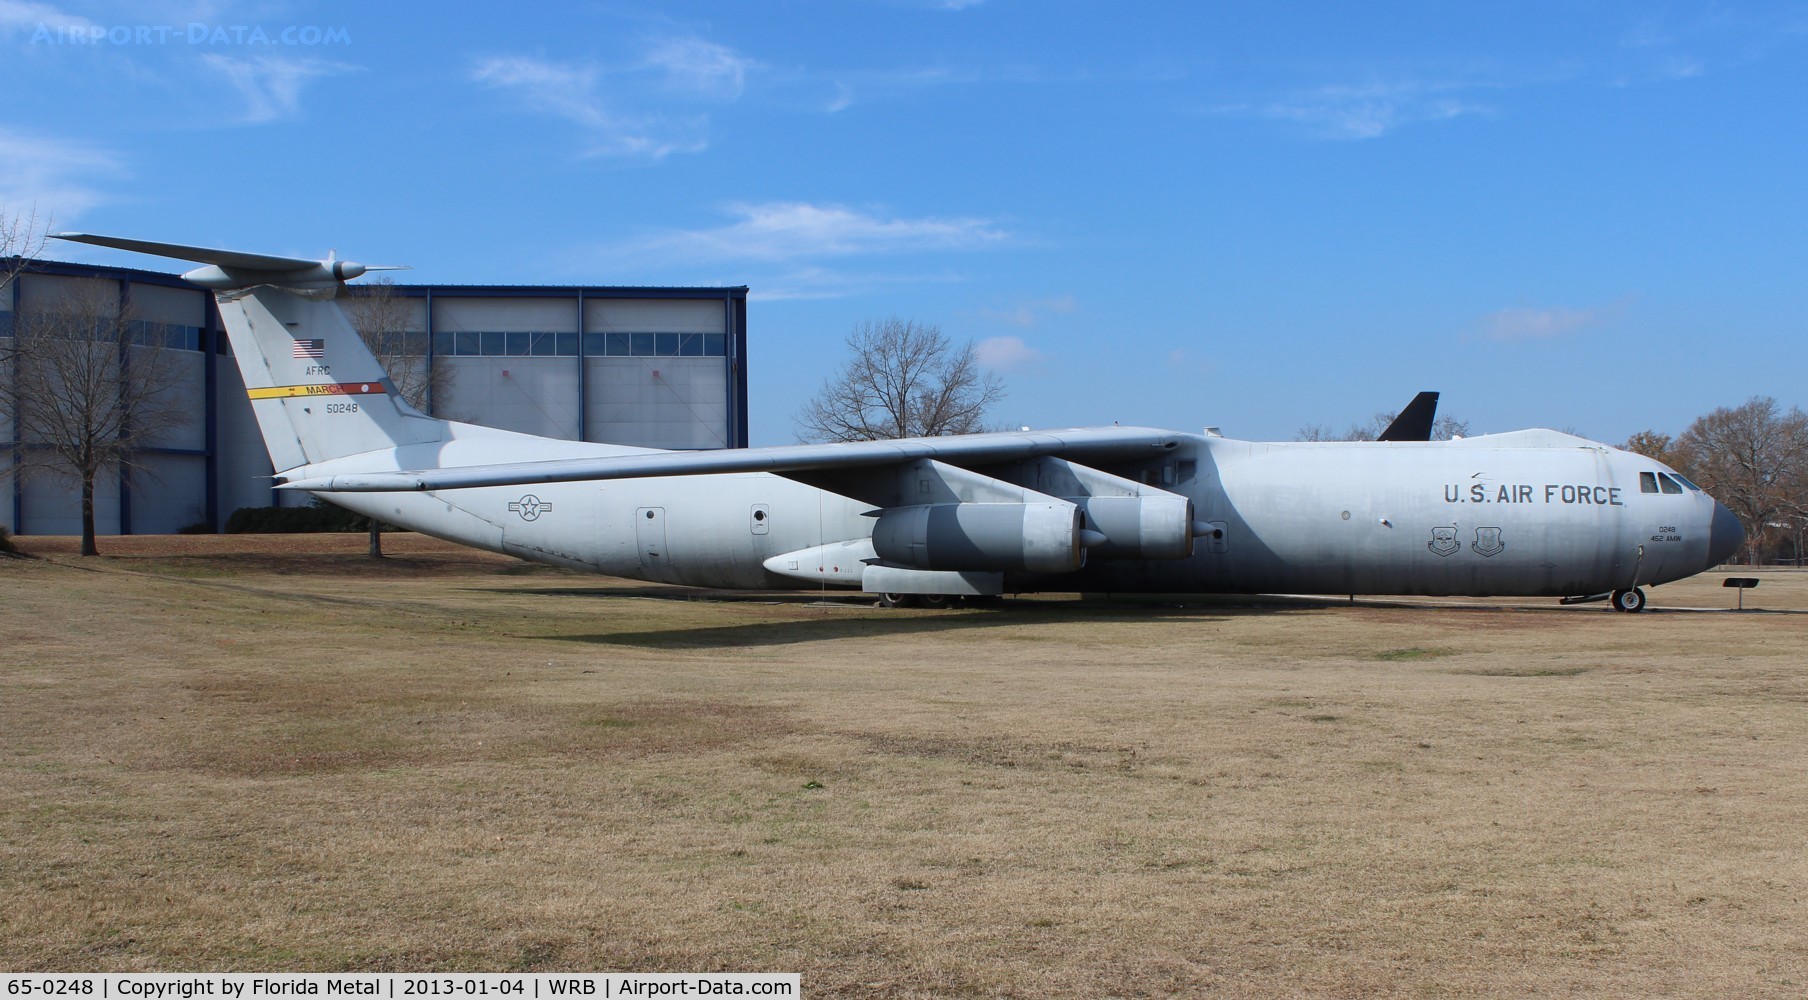 65-0248, 1965 Lockheed C-141A Starlifter C/N 300-6099, C-141A Starlifter